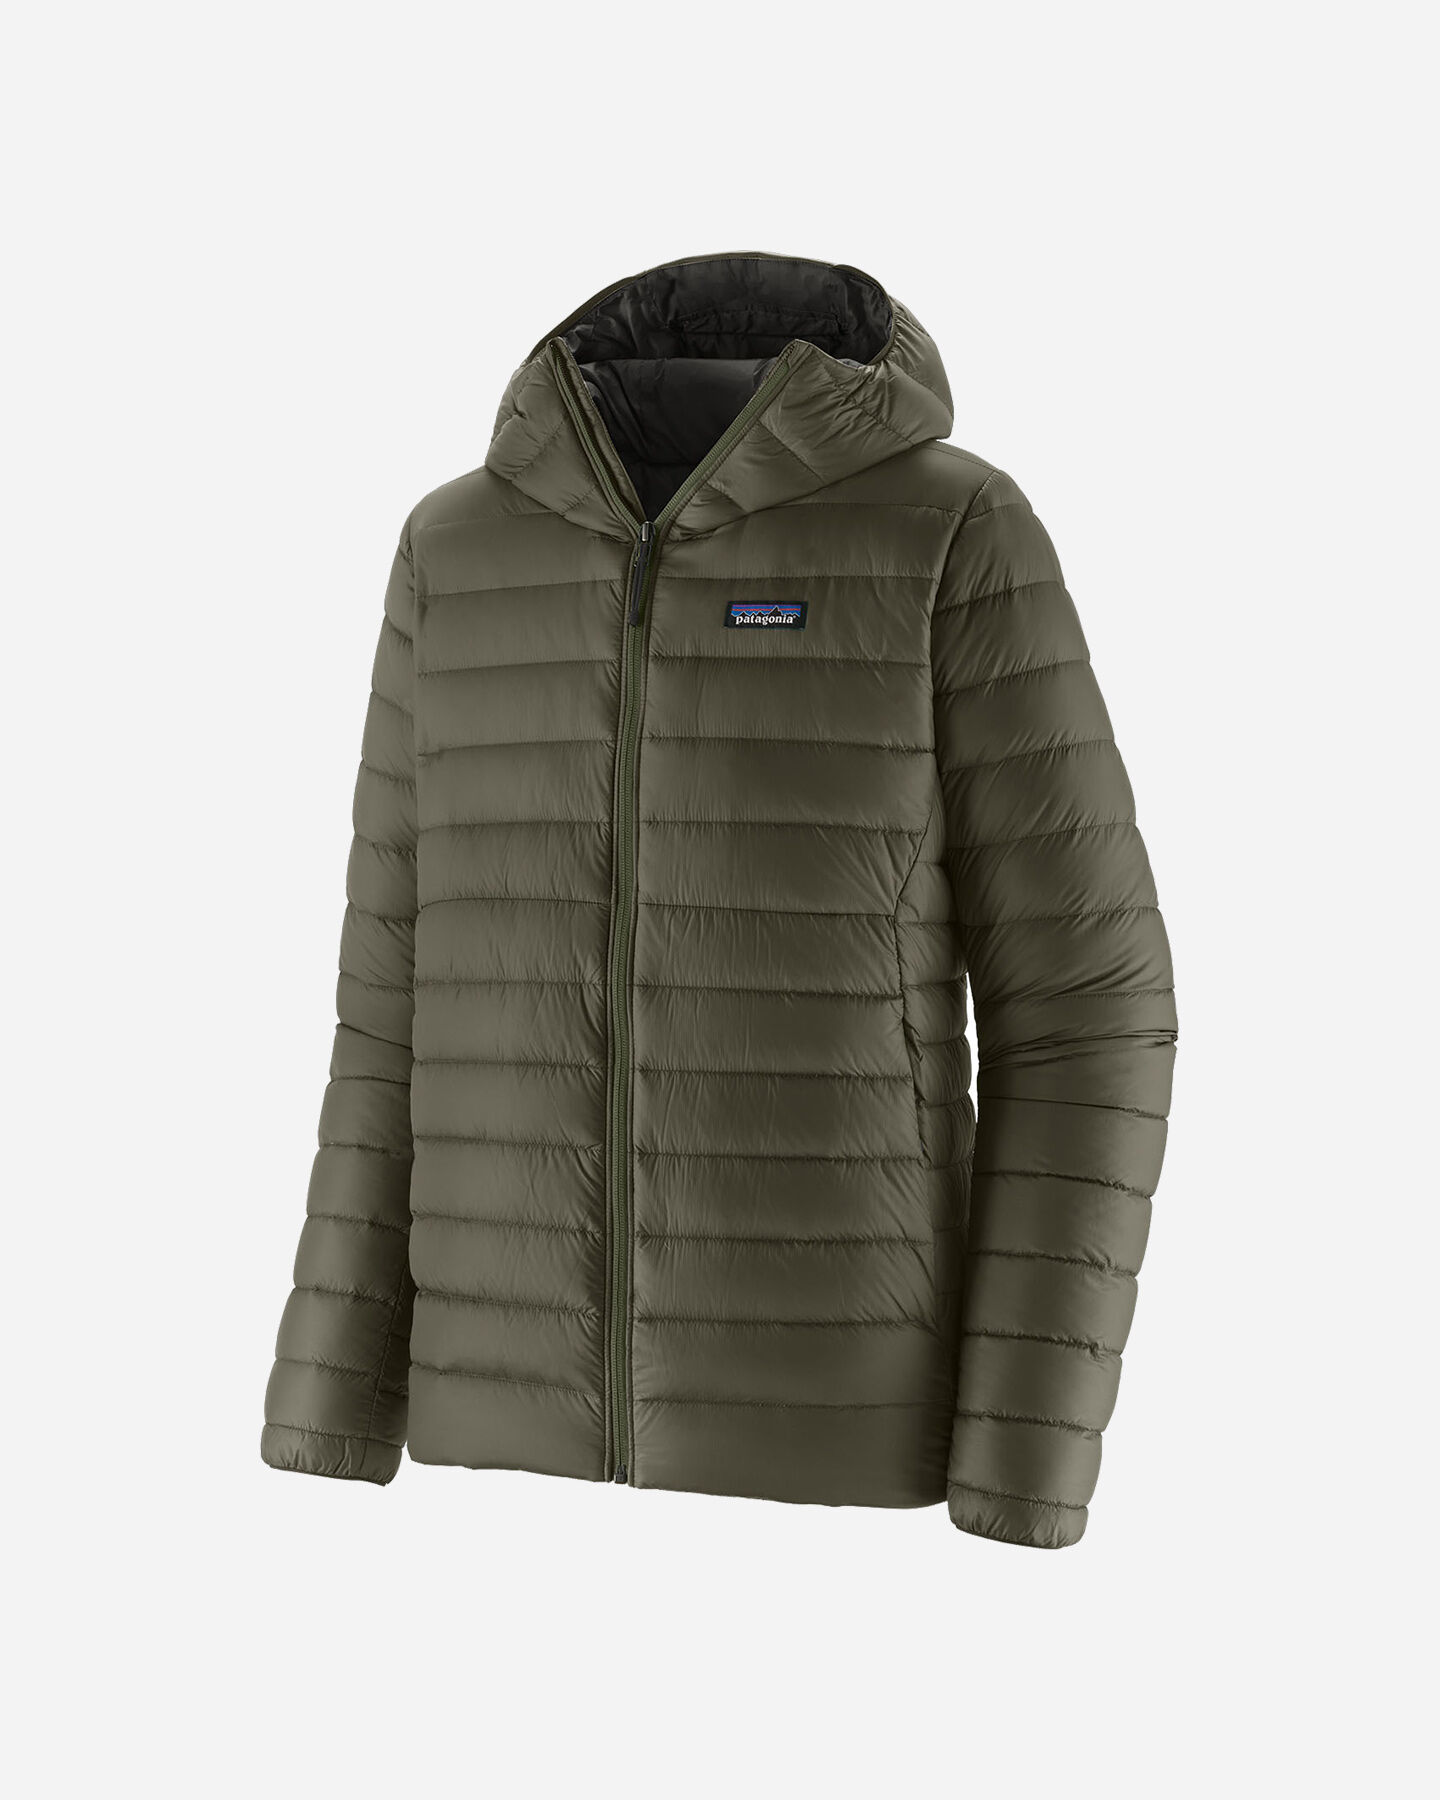  Piumino PATAGONIA DOWN M S5628801|BSNG|S scatto 0